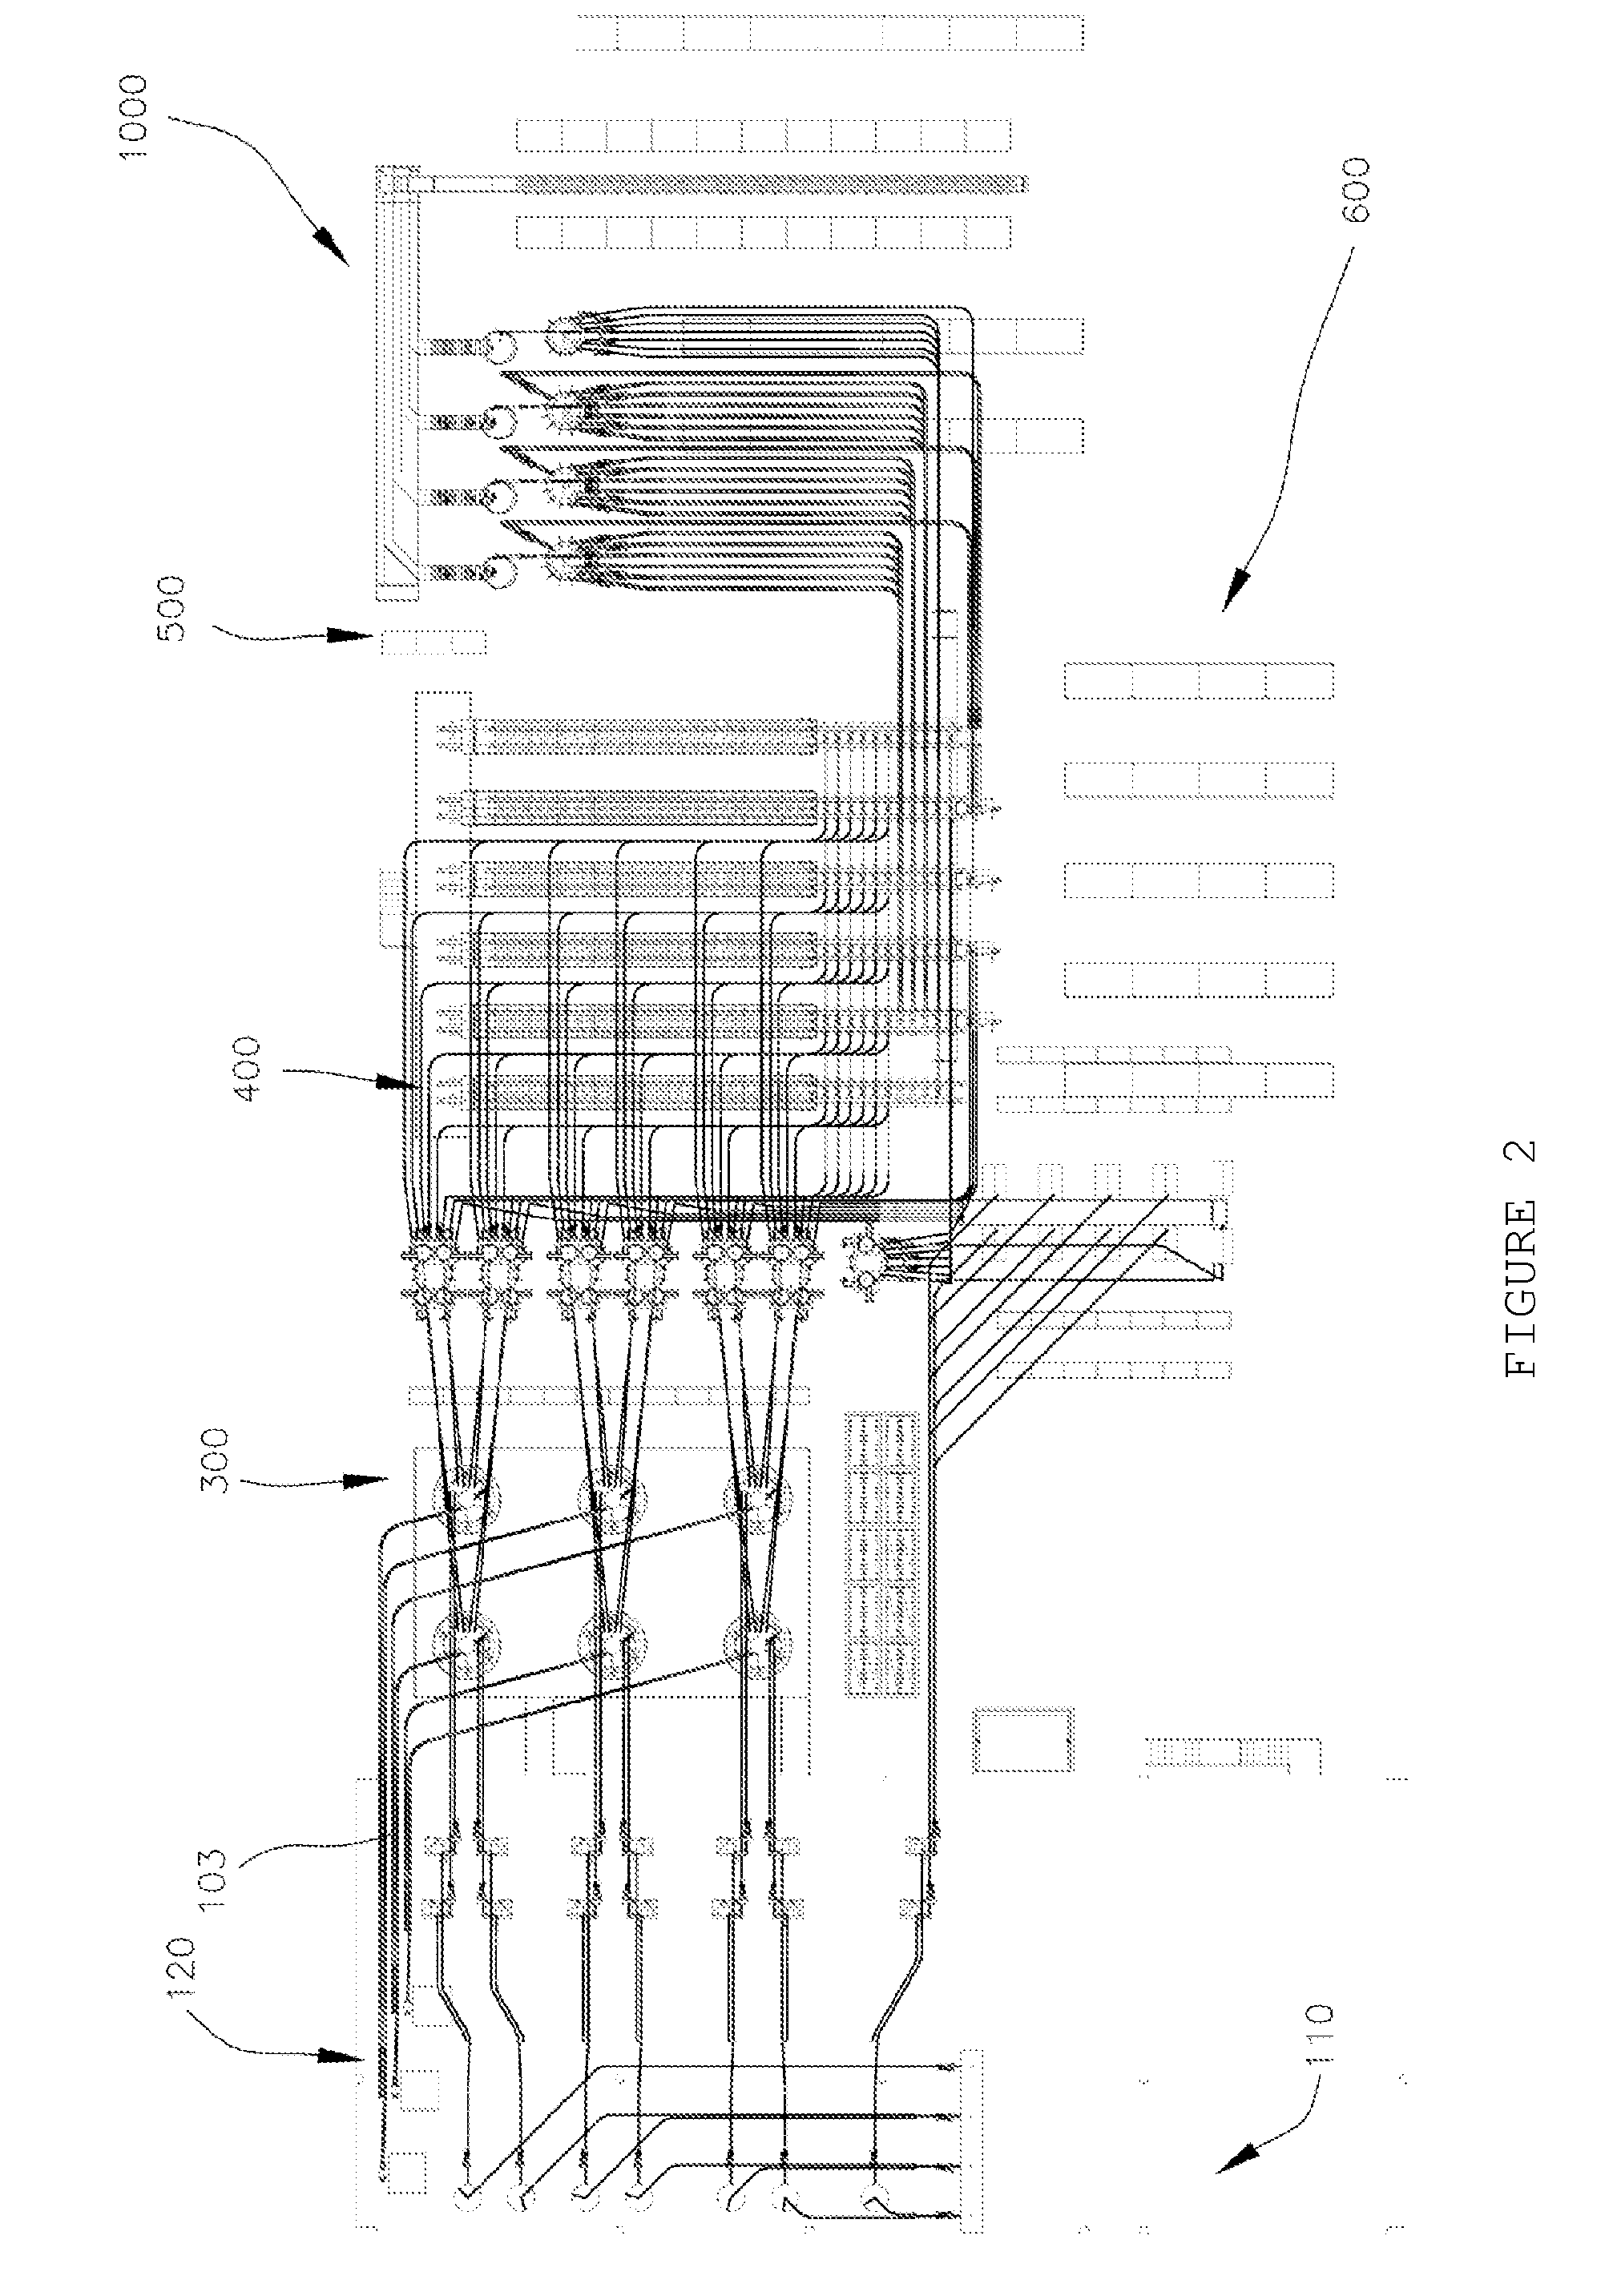 Automated pharmacy drug handling and prescription verification system and method